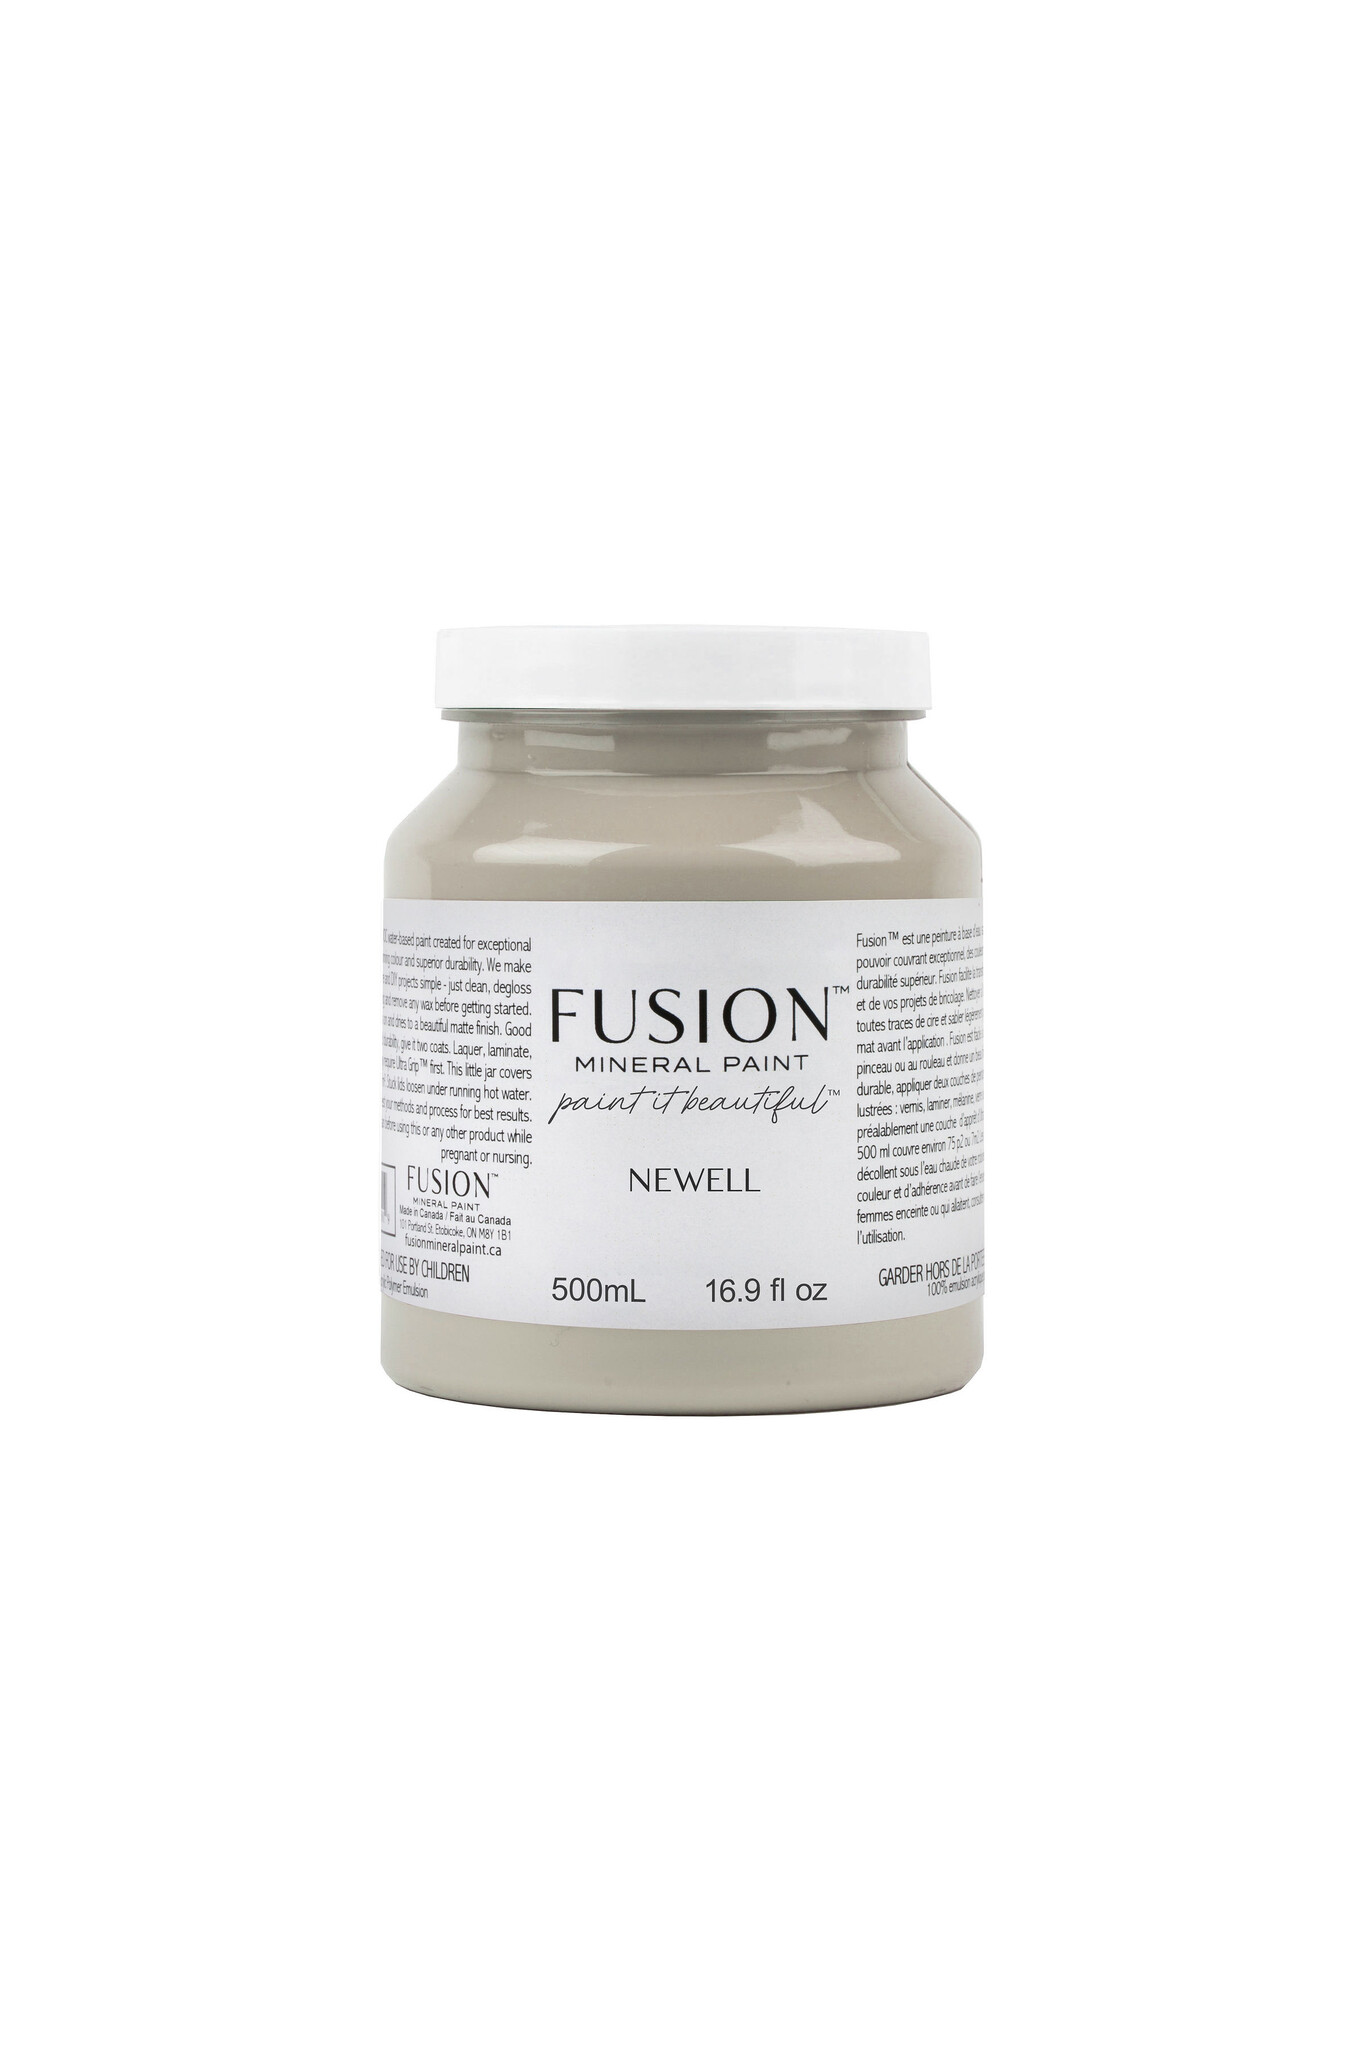 Fusion Mineral Paint Fusion - Newell - 500ml